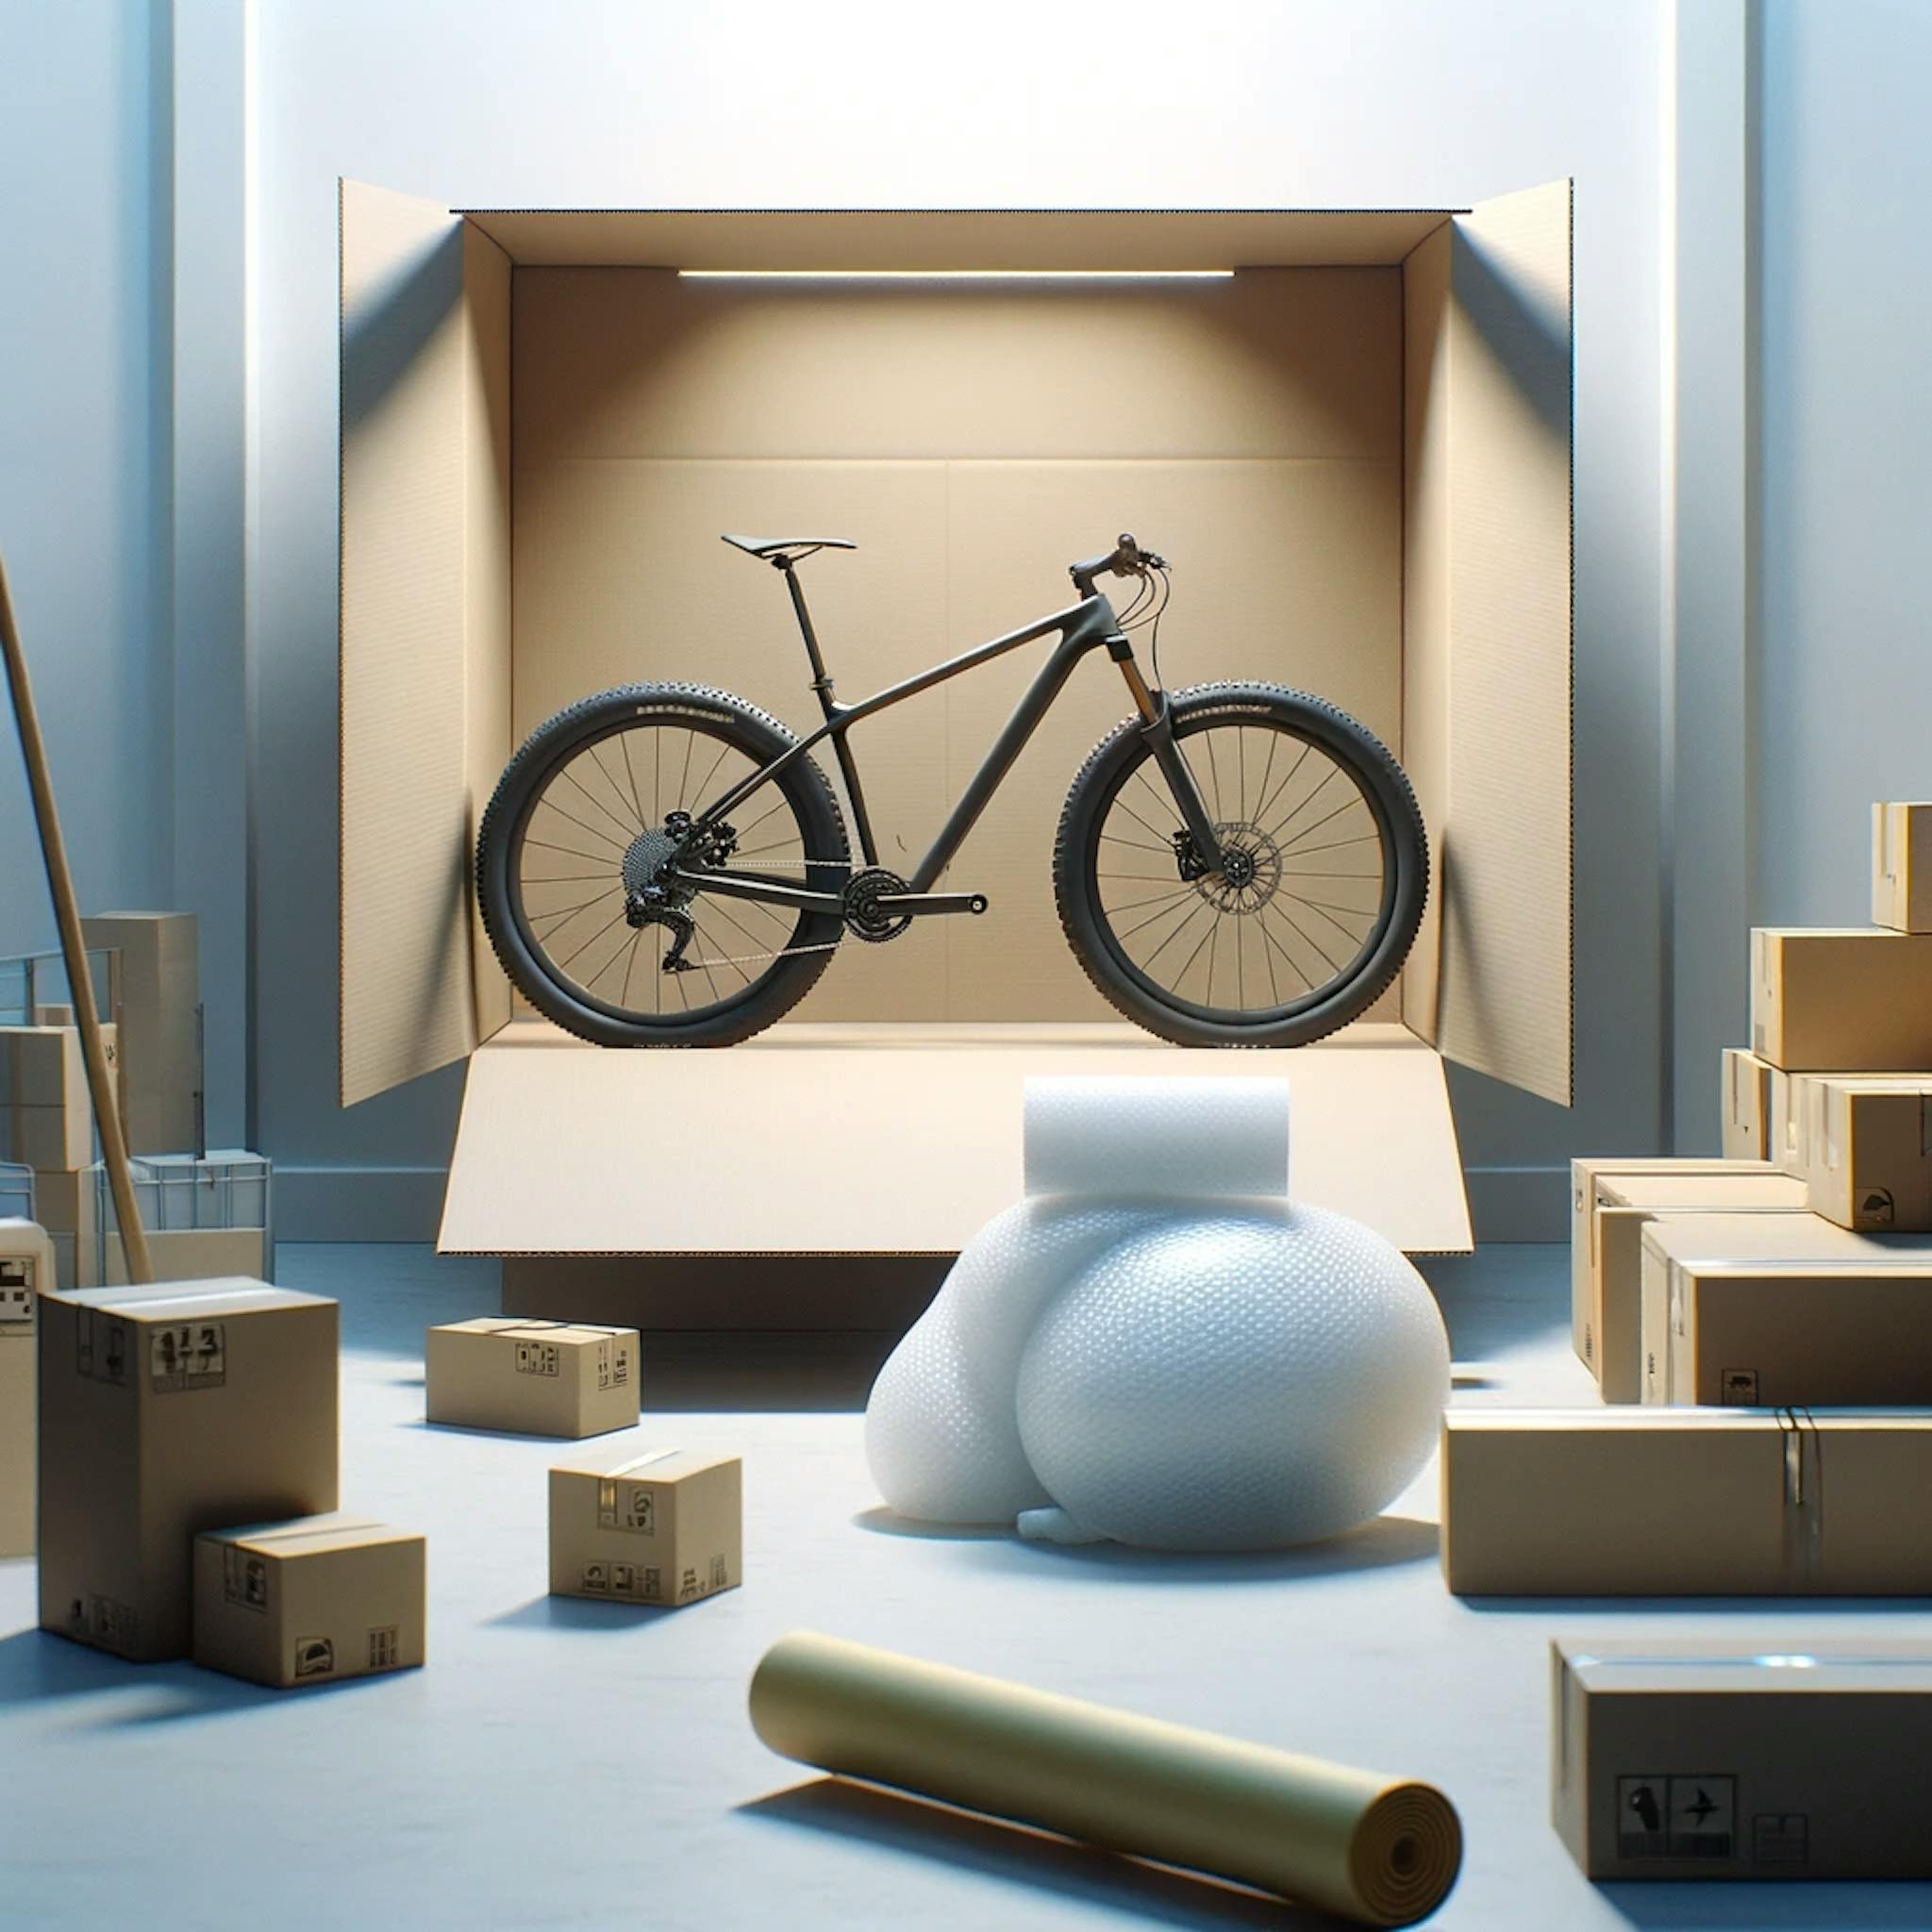 A bike in a shipping package, being prepared to be transported. 